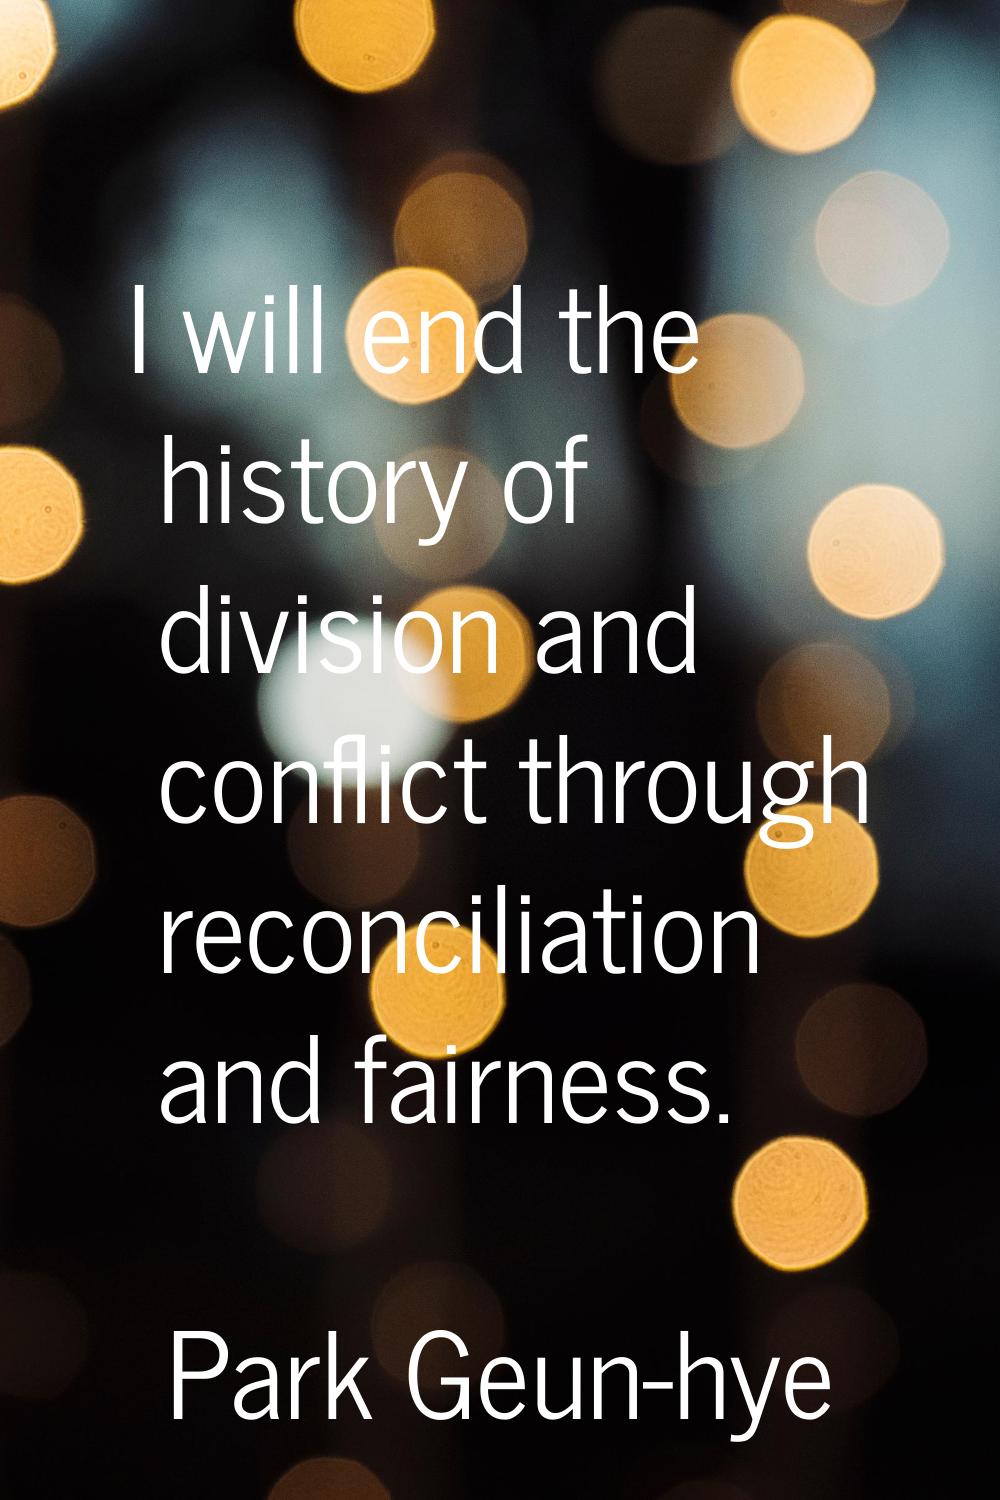 I will end the history of division and conflict through reconciliation and fairness.